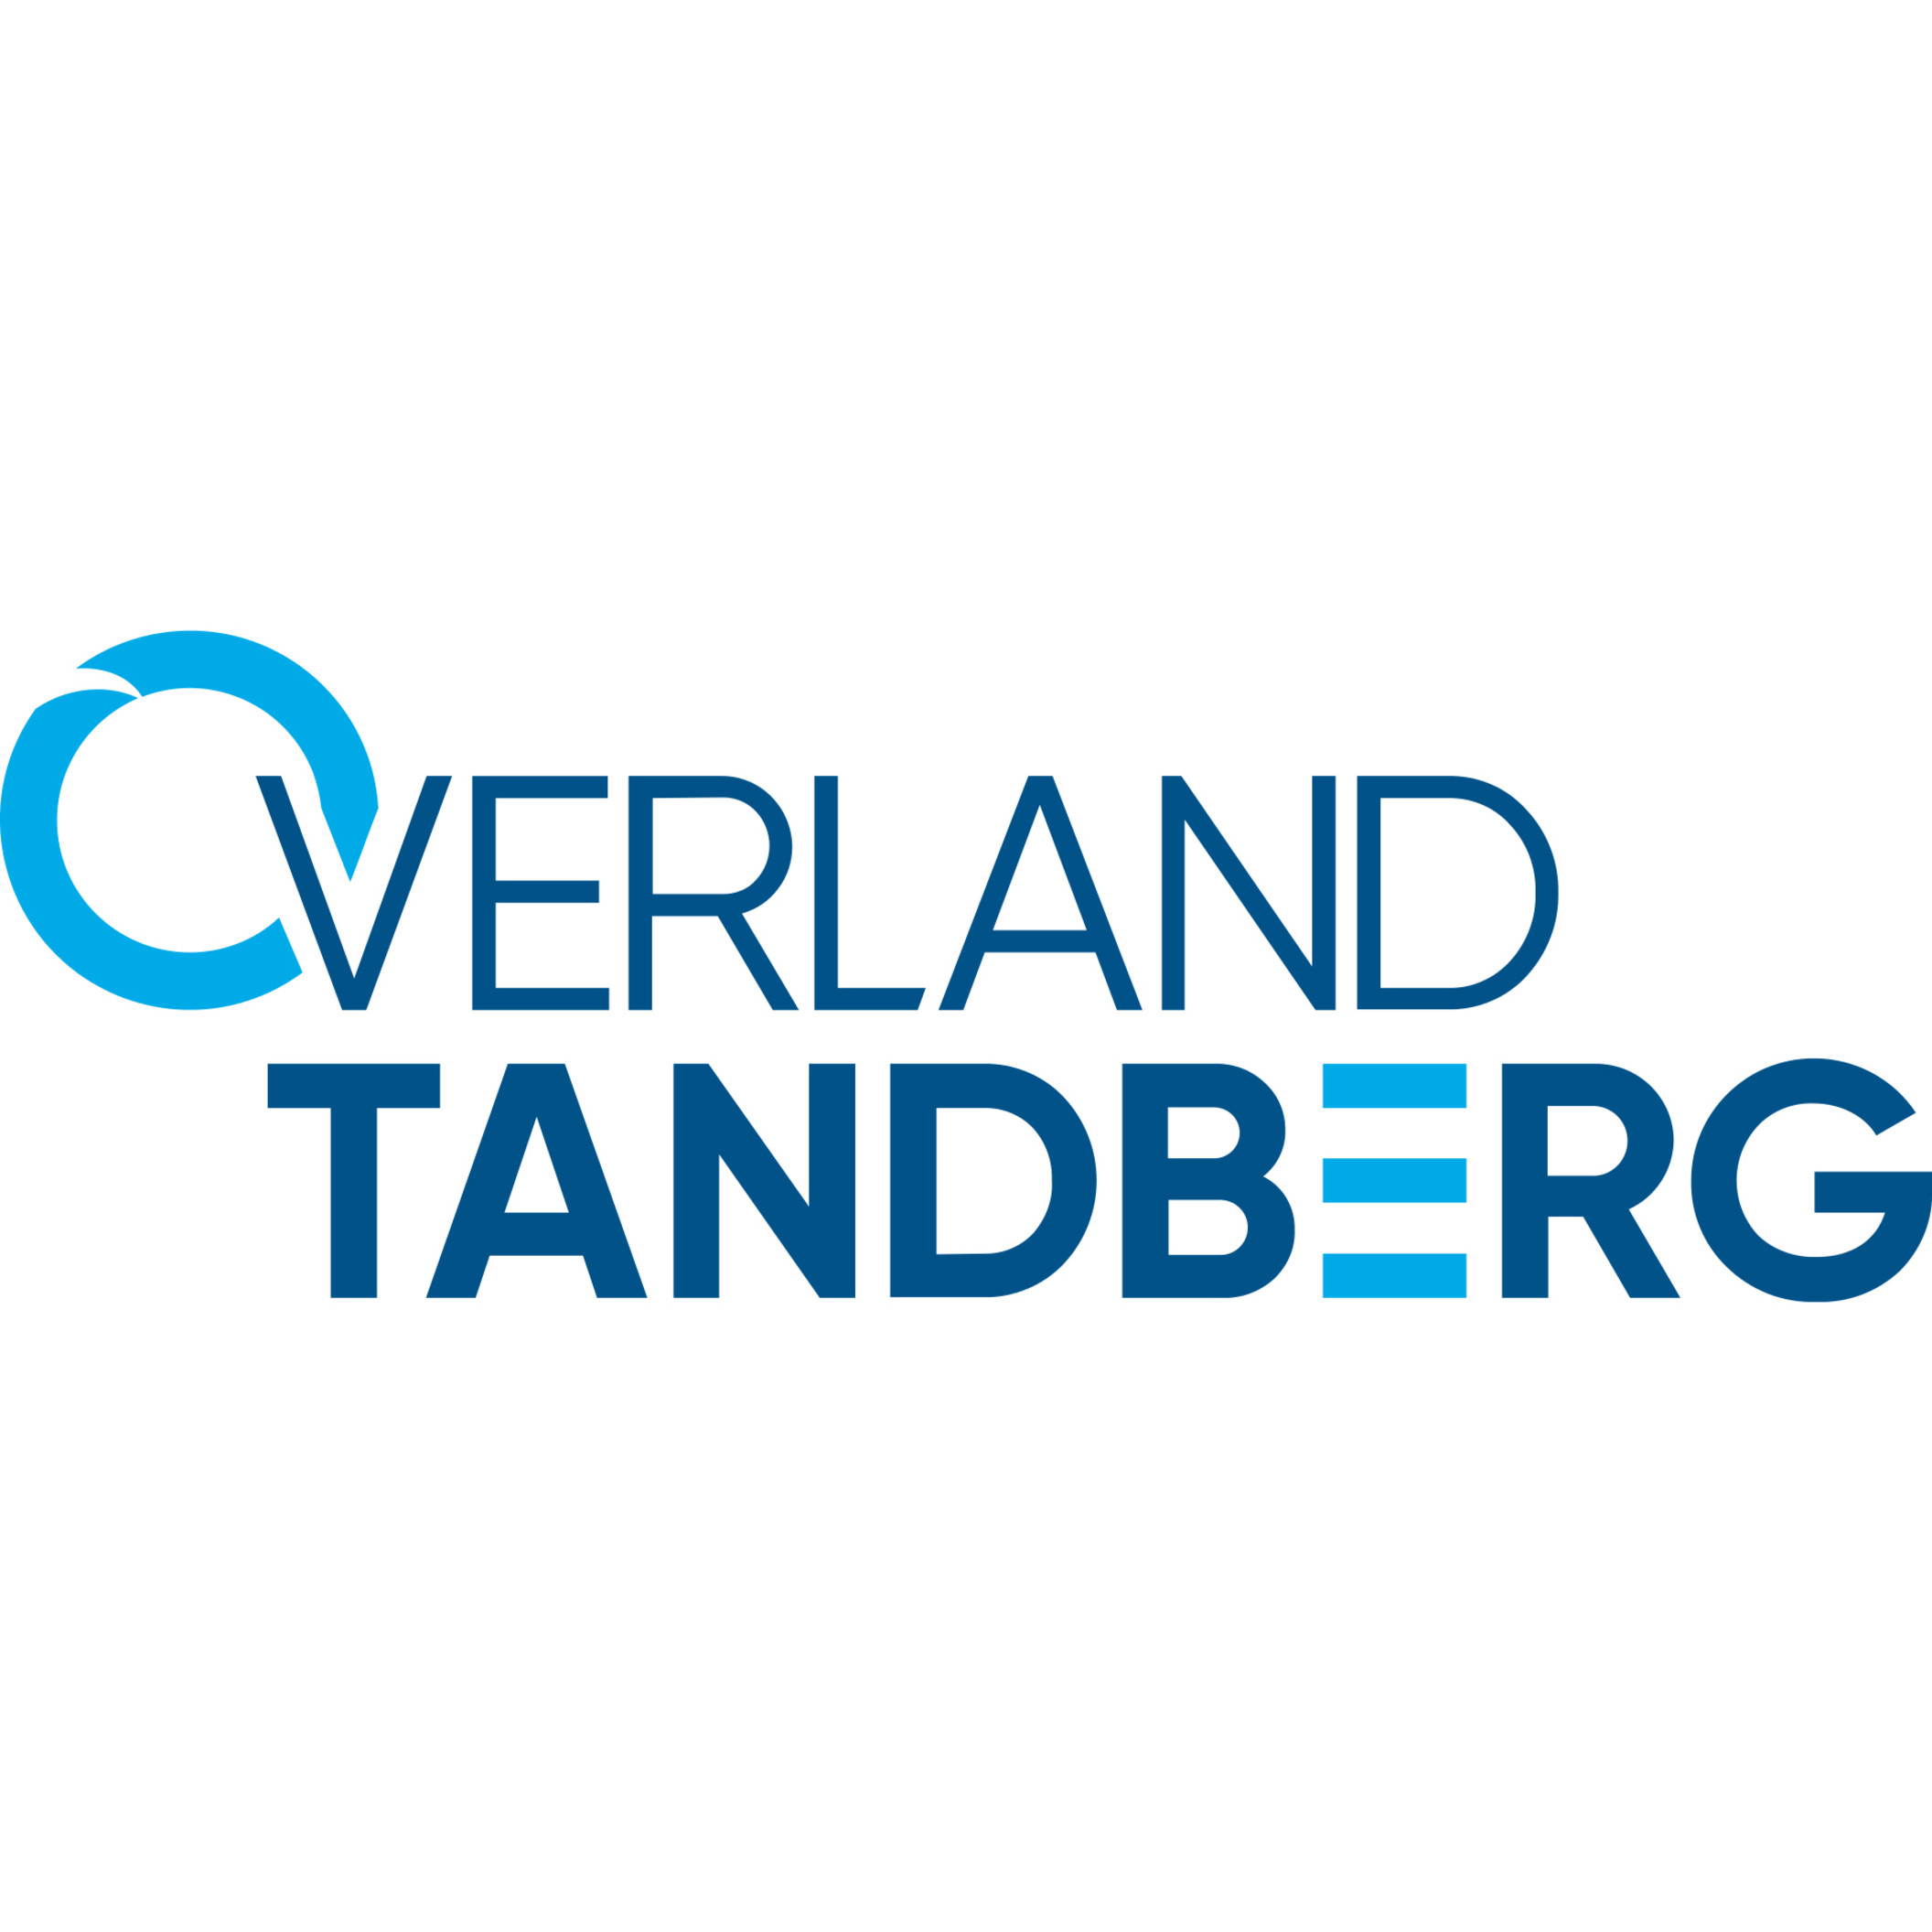 Overland -Tandberg Cleaning CartridgeFor UniversalLabeled20 / Pack 434151